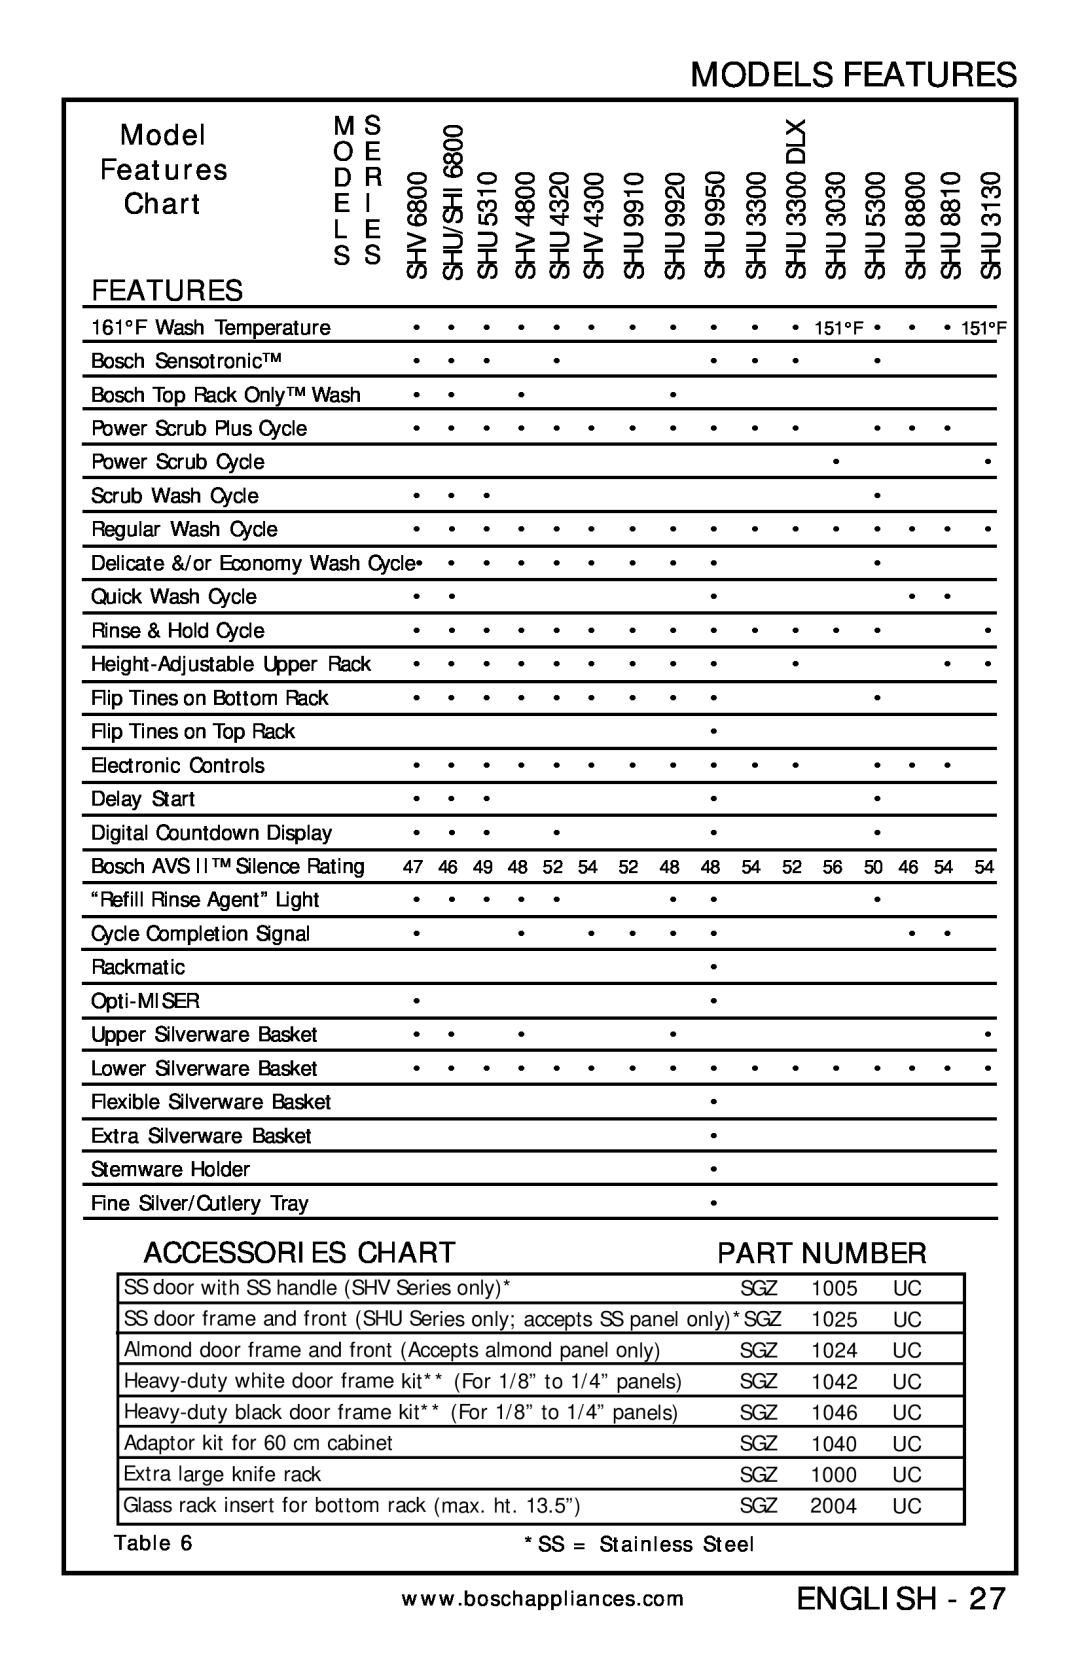 Bosch Appliances SHU 6800, SHV 4300 Models Features, Accessories Chart, Part Number, English, SS = Stainless Steel 